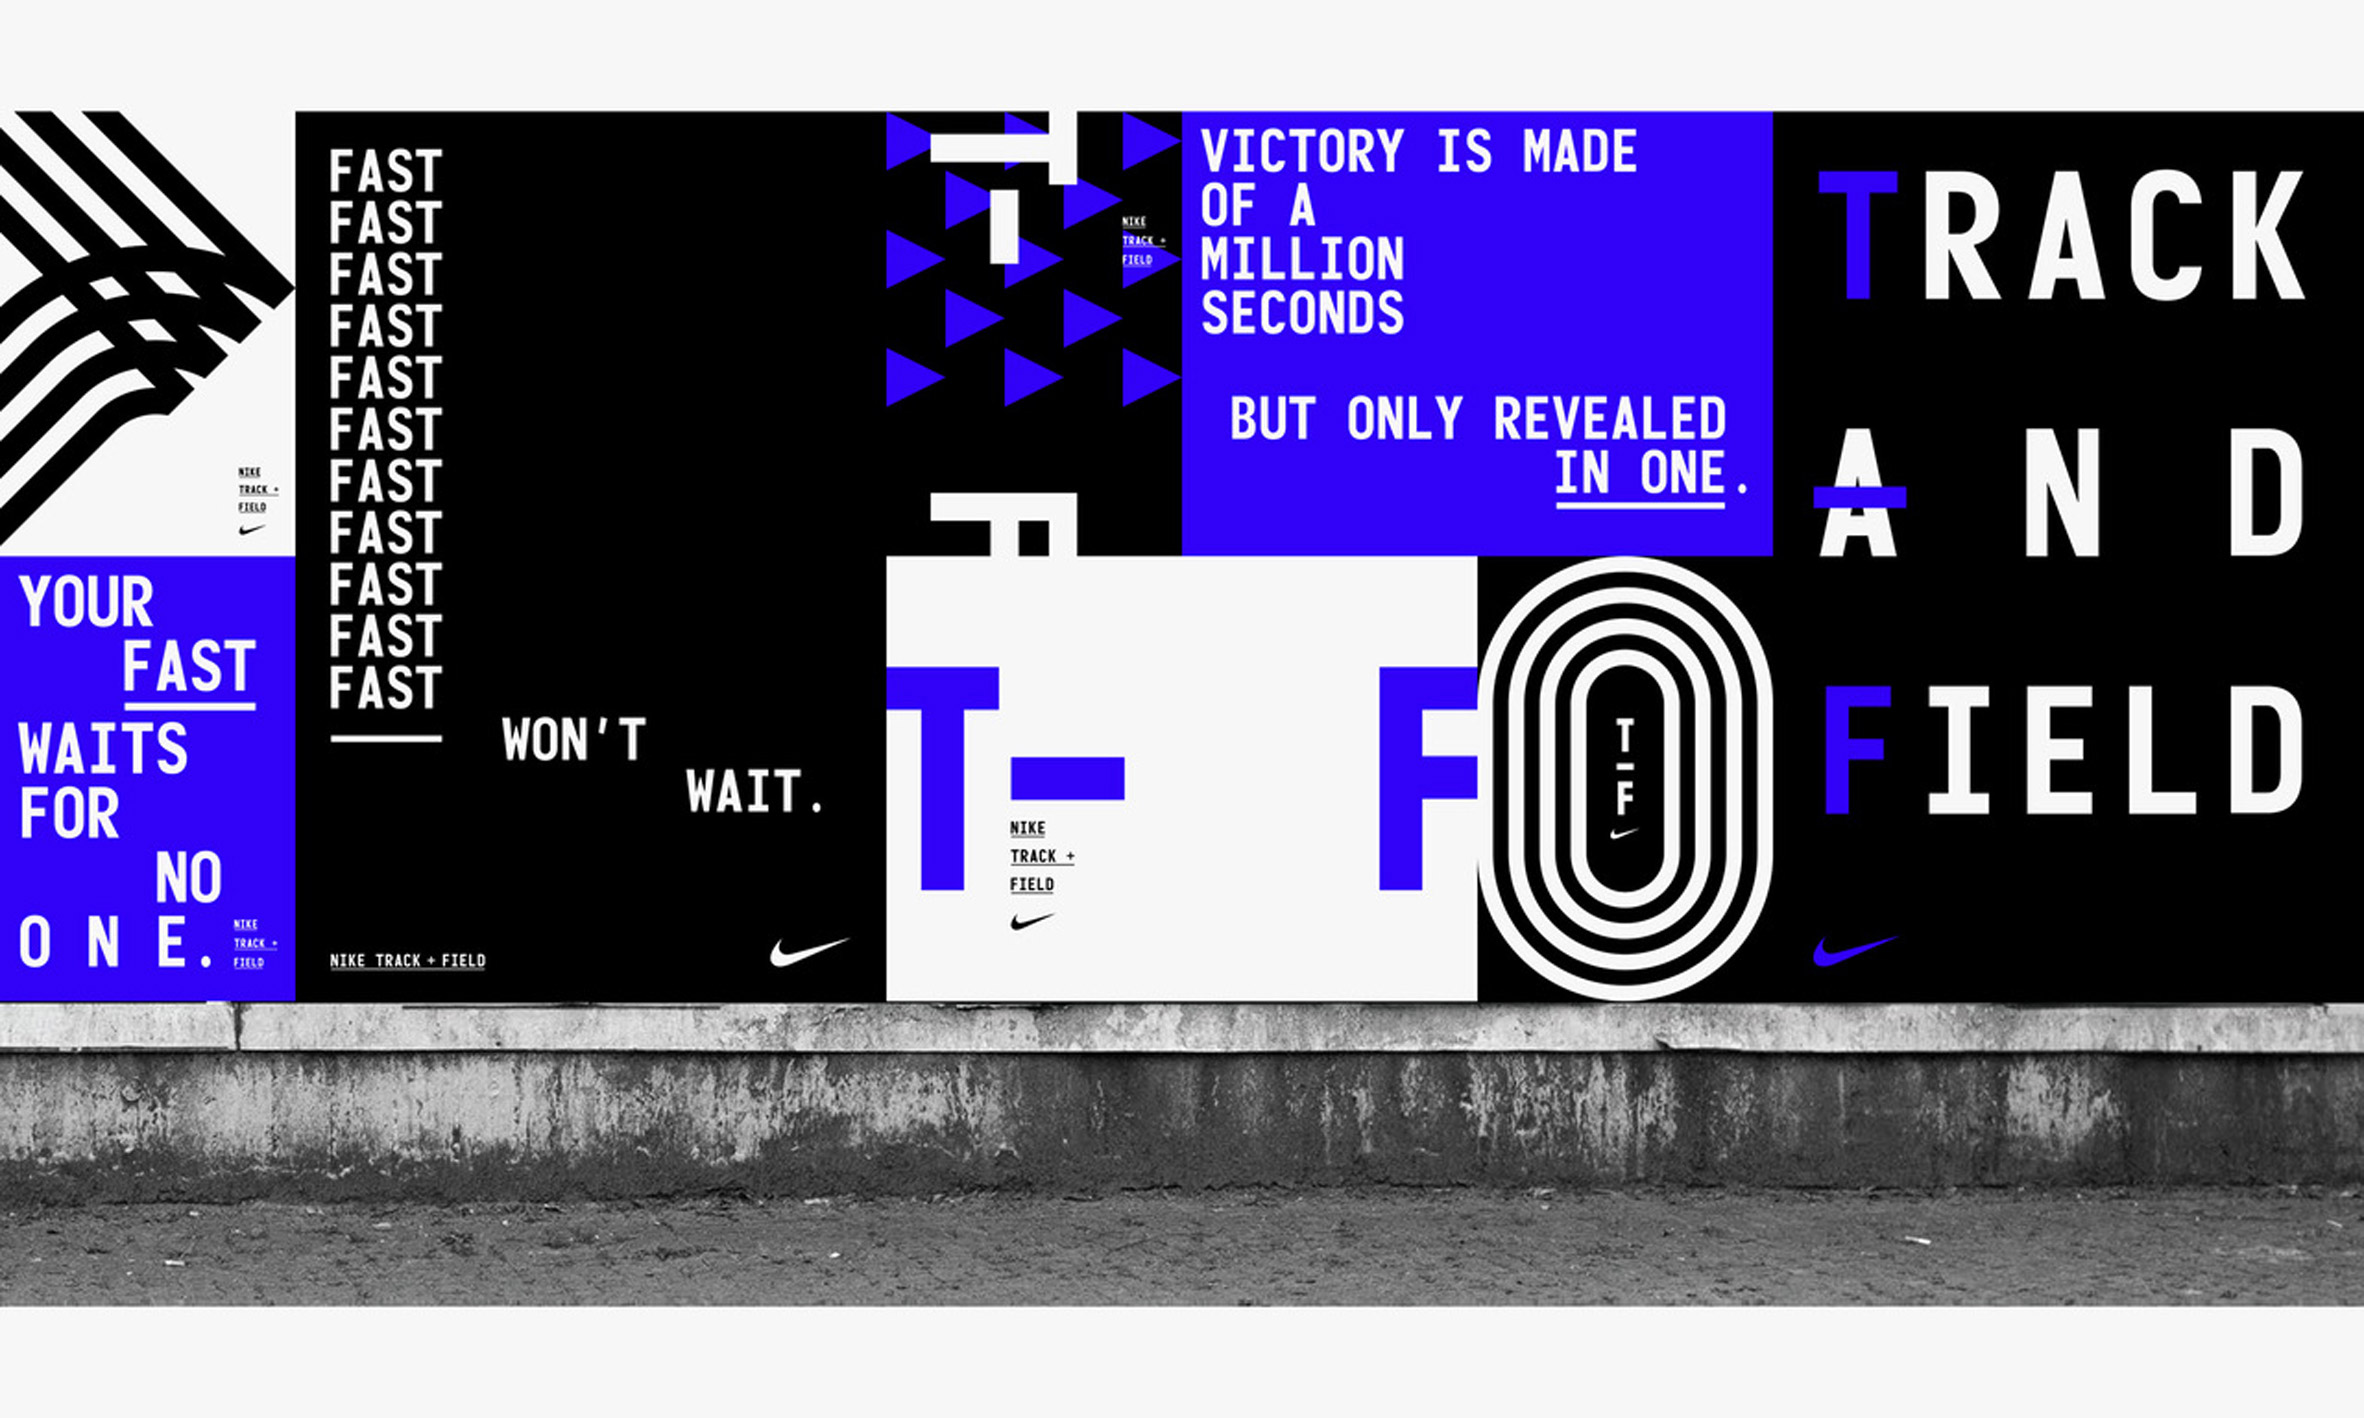 Nike's updated Track + Field branding is based on acceleration